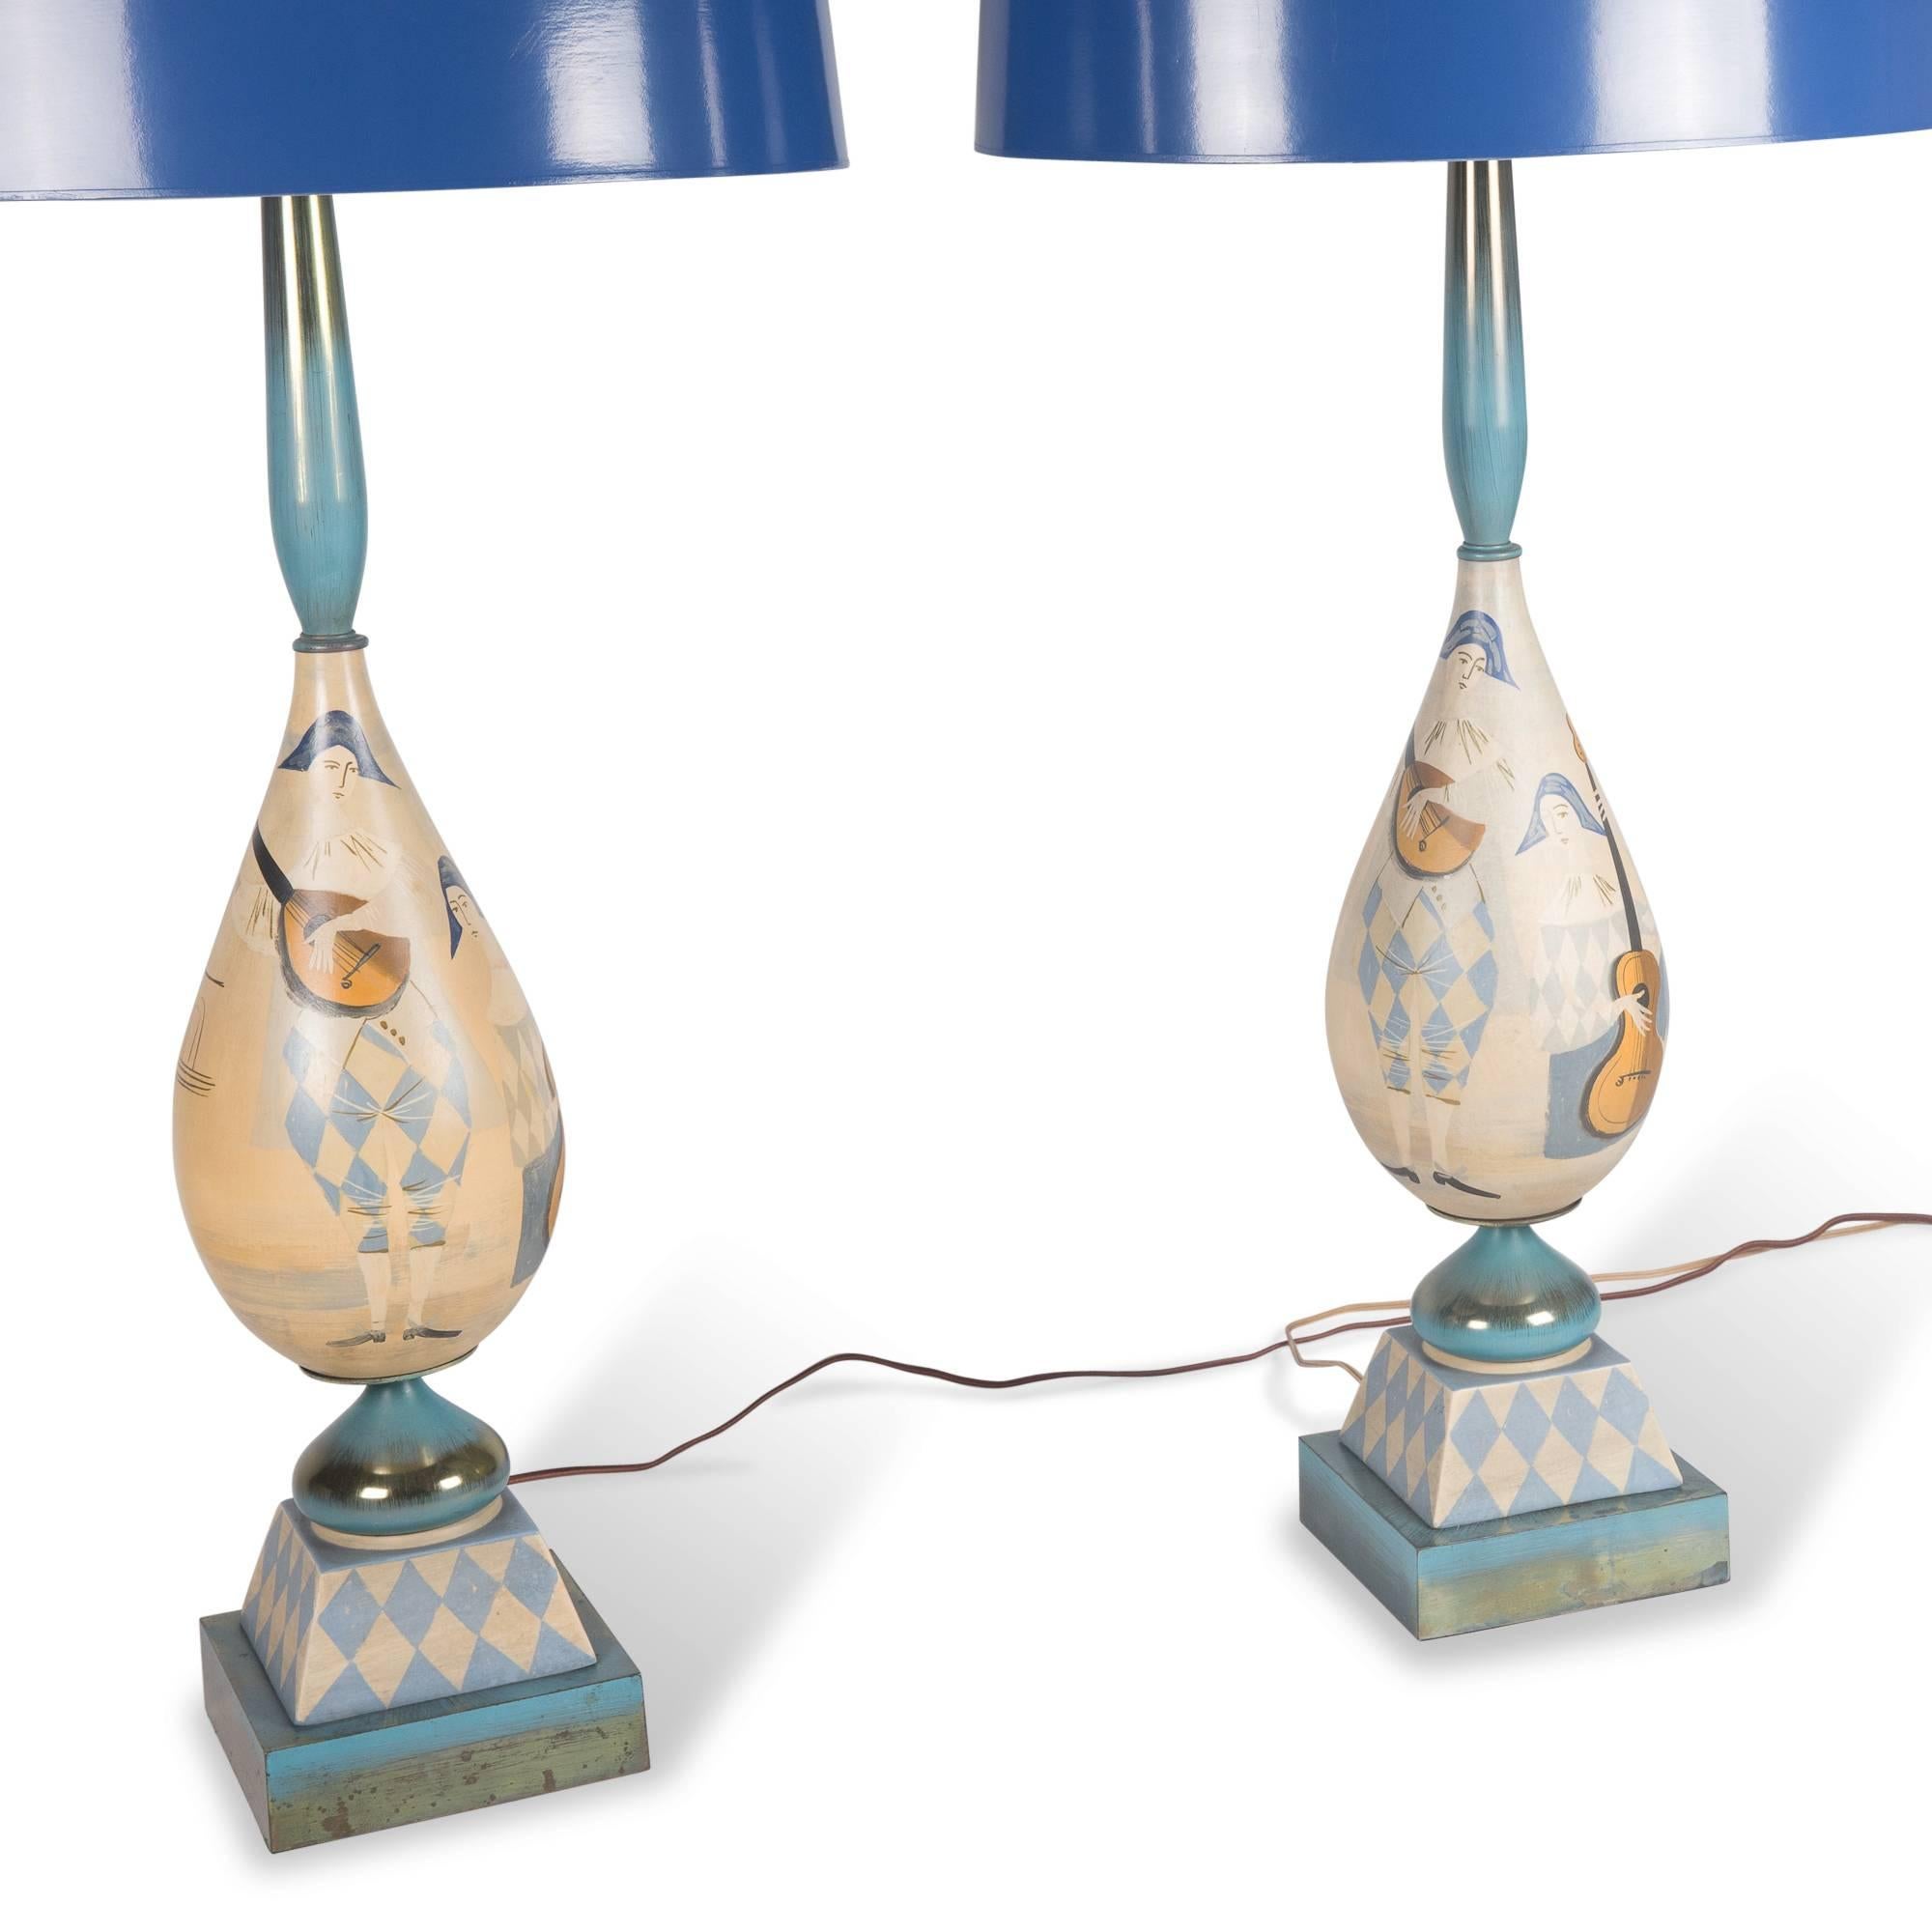 Mid-20th Century Italian Hand-Painted Wood Table Lamps, 1930s For Sale